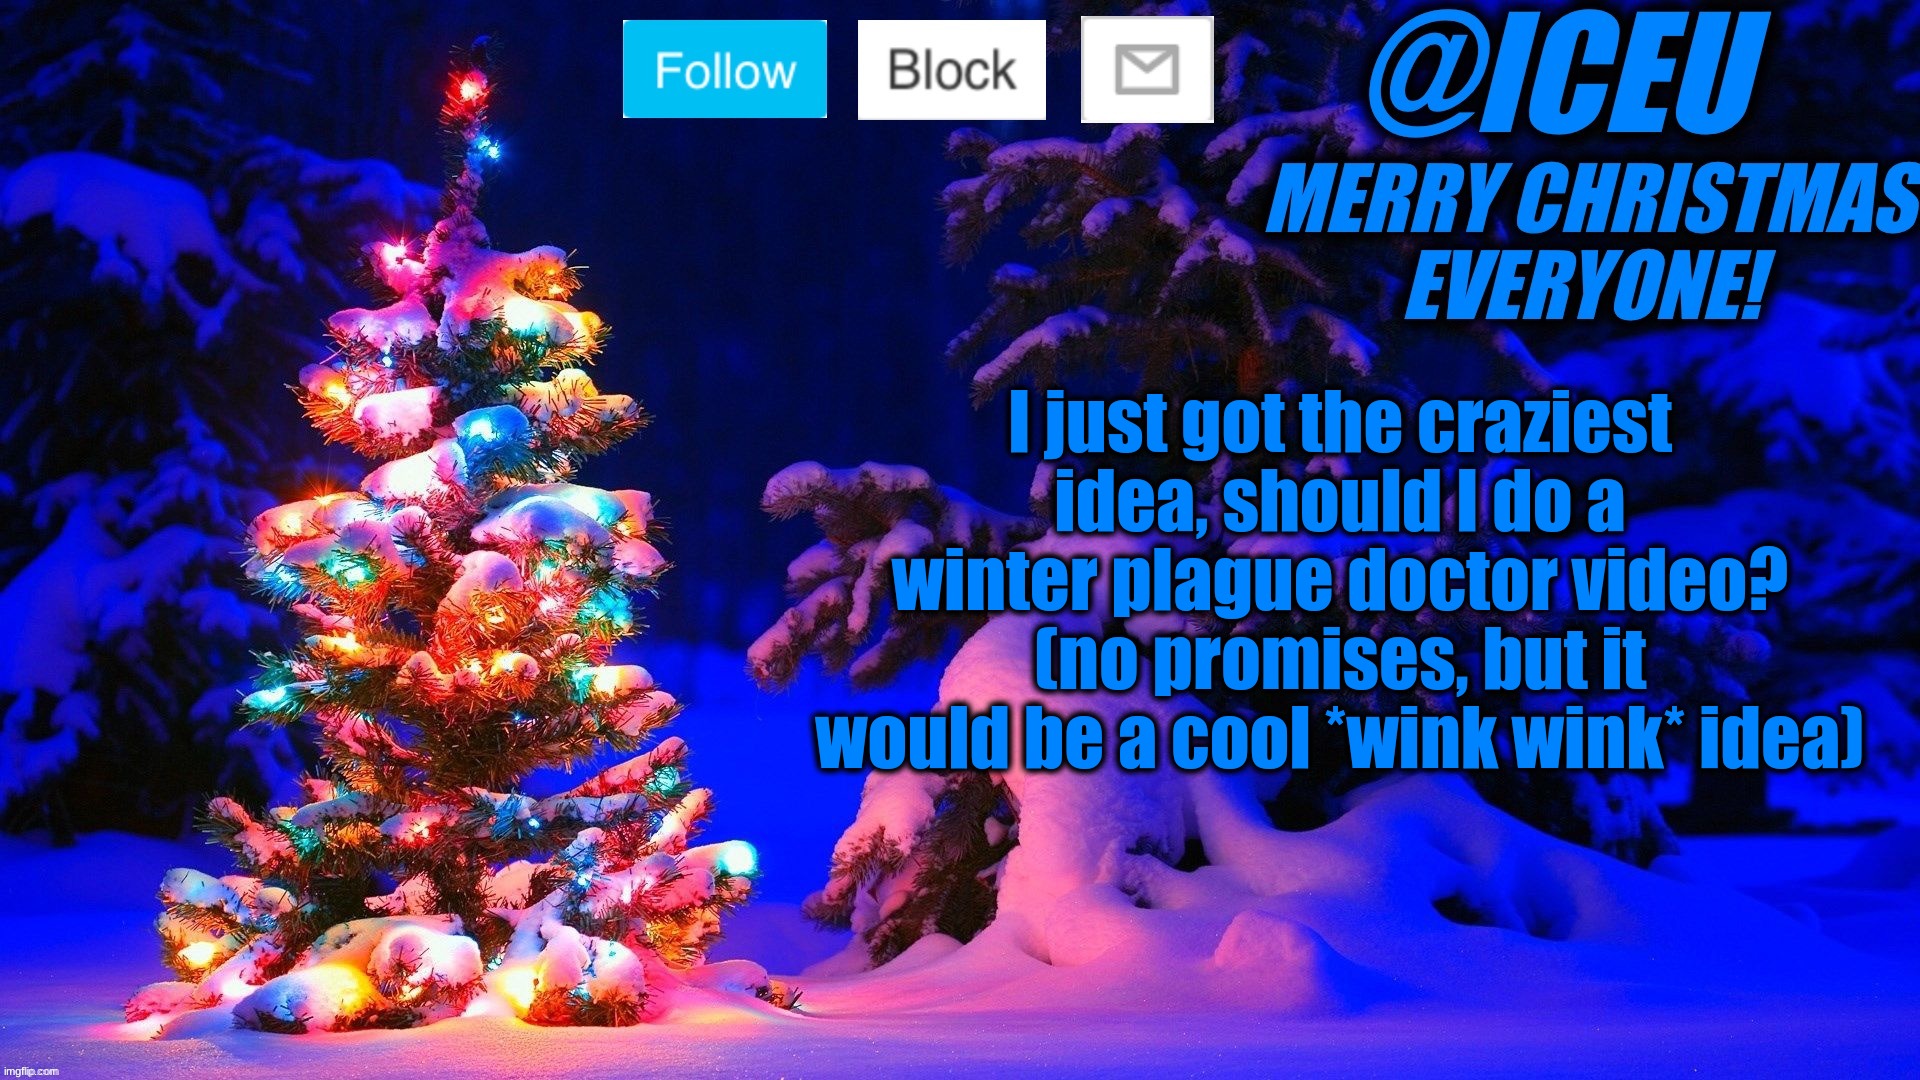 I think it would be awesome tbh | I just got the craziest idea, should I do a winter plague doctor video? (no promises, but it would be a cool *wink wink* idea) | image tagged in festive_iceu 2022 christmas template 2 | made w/ Imgflip meme maker